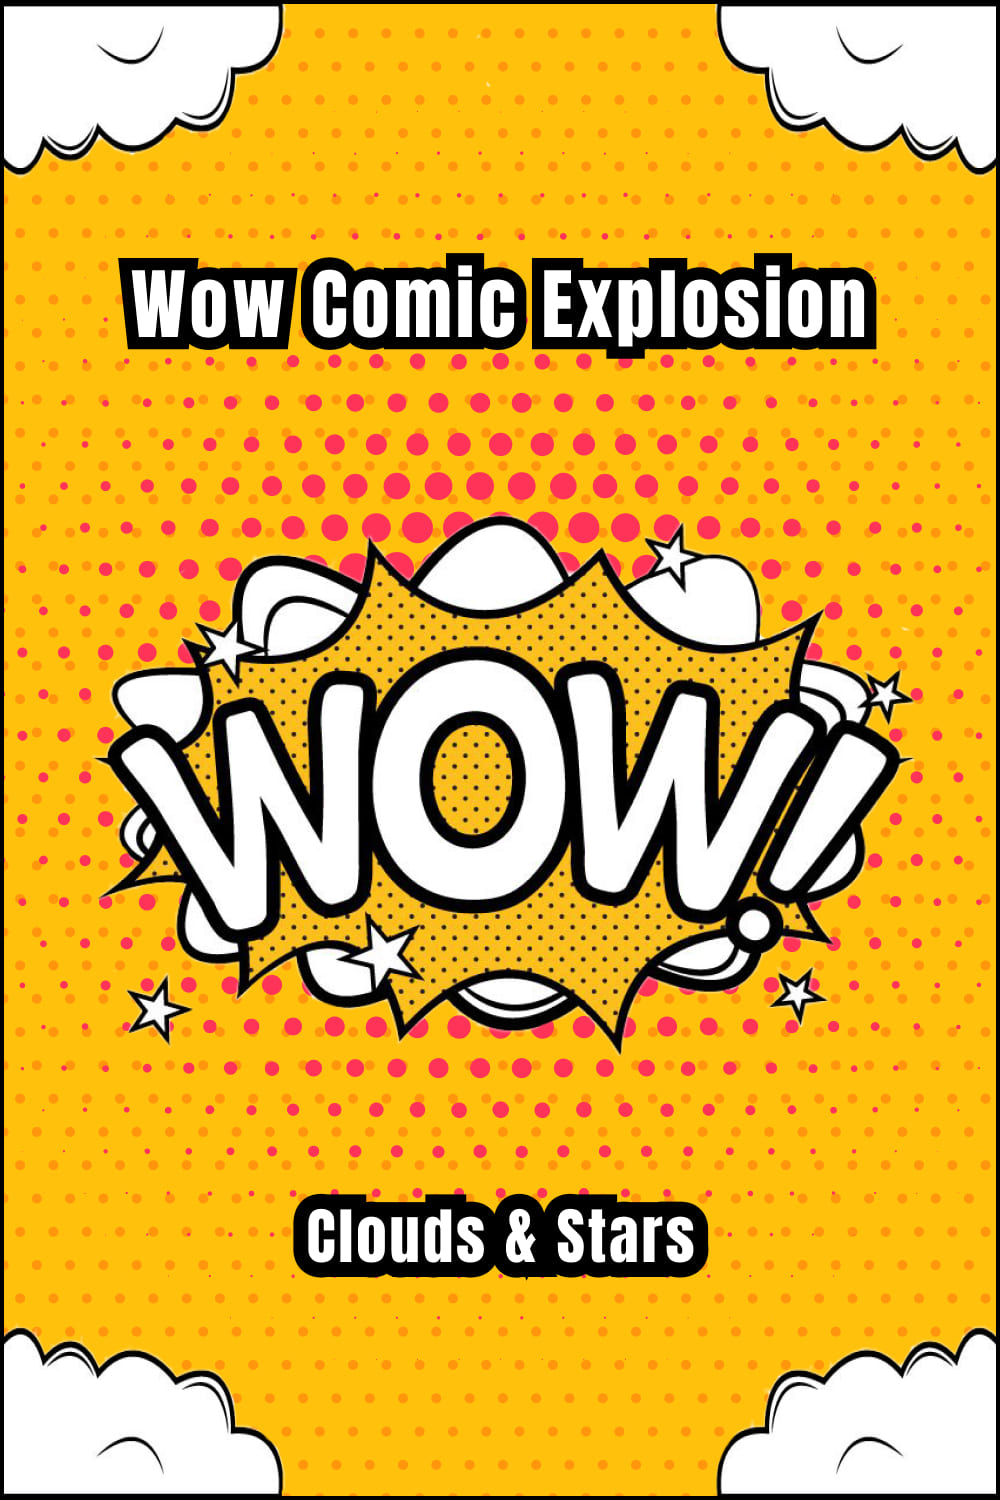 wow comic explosion clouds stars pinterest 678